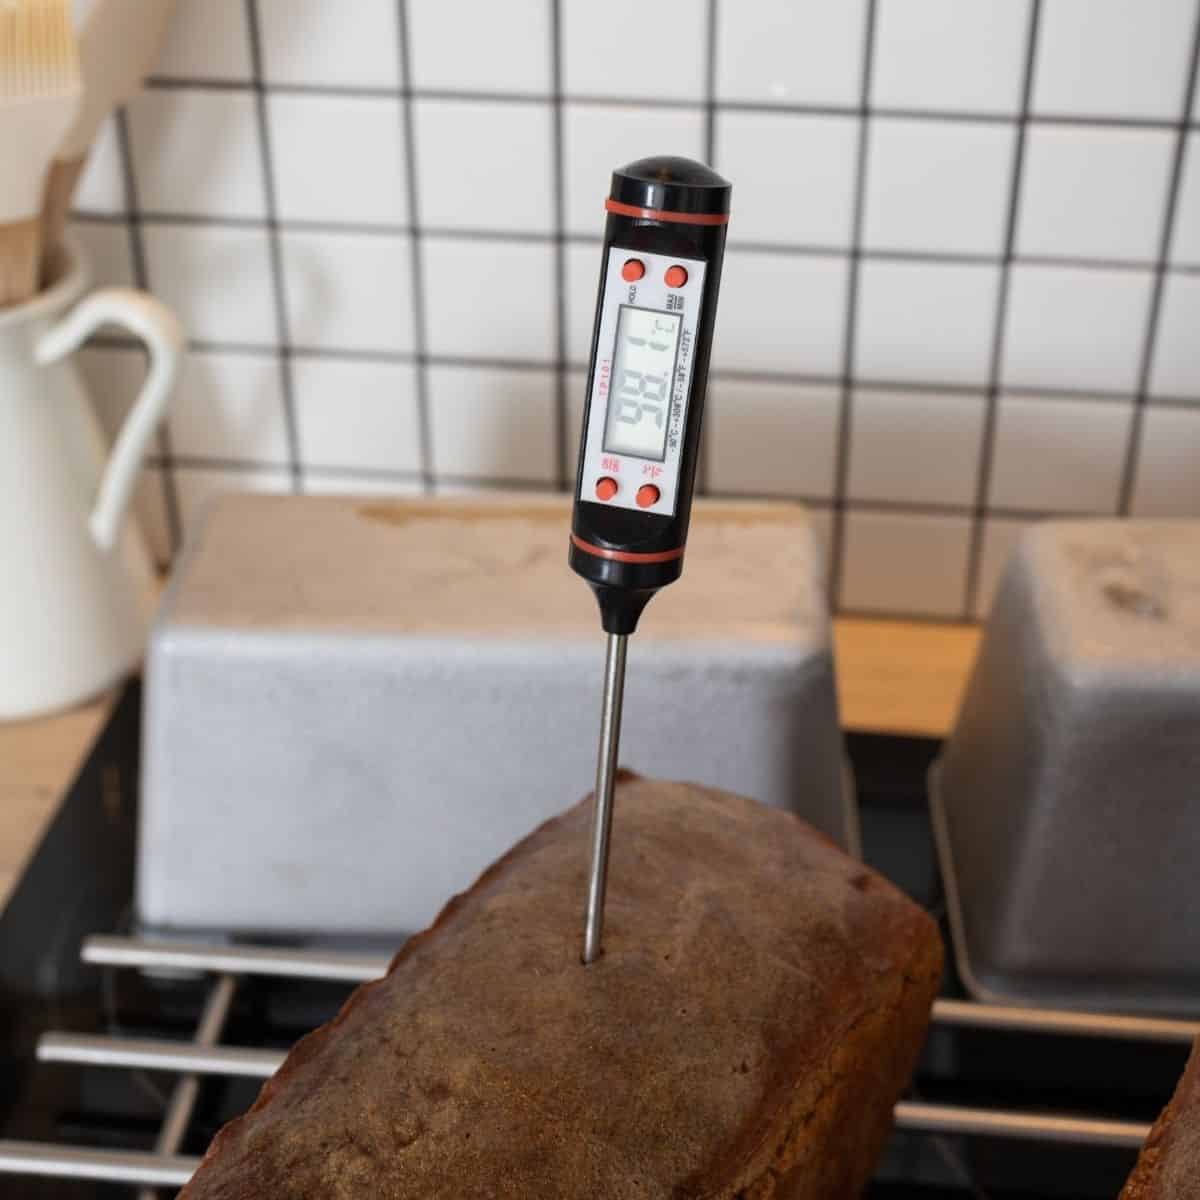 https://breadopedia.com/wp-content/uploads/2020/05/best-thermometer-for-bread-baking-featured.jpg